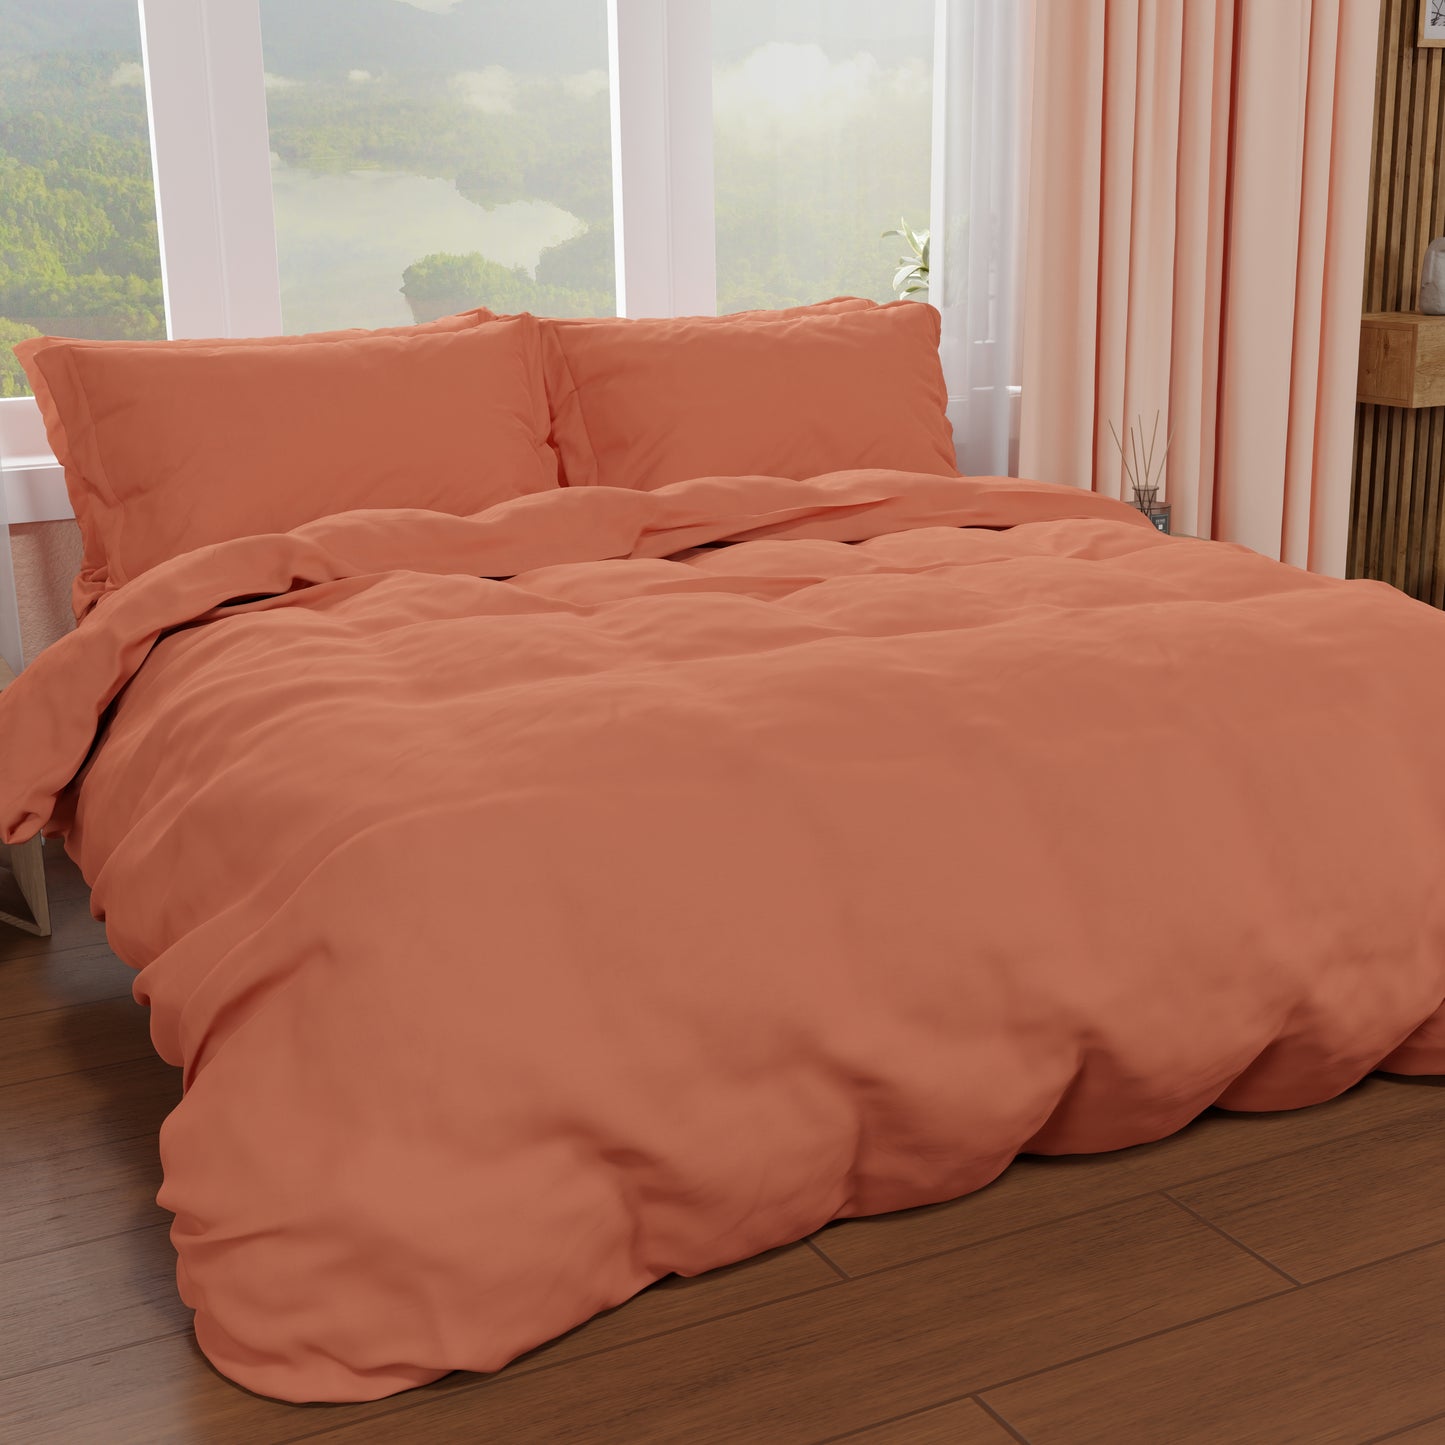 Double Duvet Cover, Duvet Cover and Pillowcases, Solid Color Dark Powder